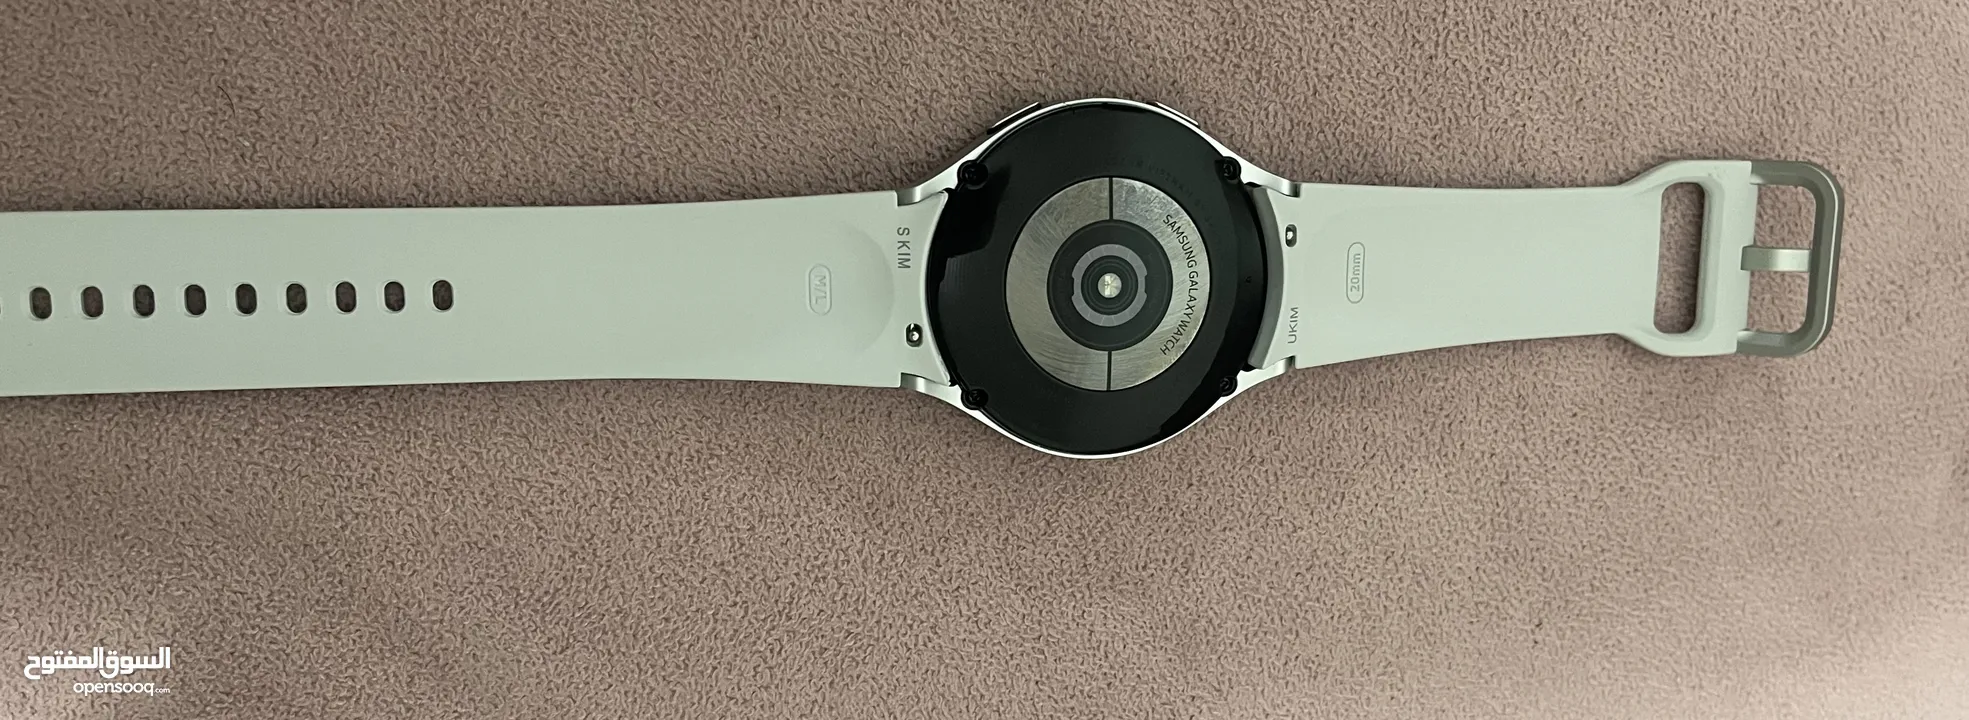 Galaxy Watch 4   New from South Korea